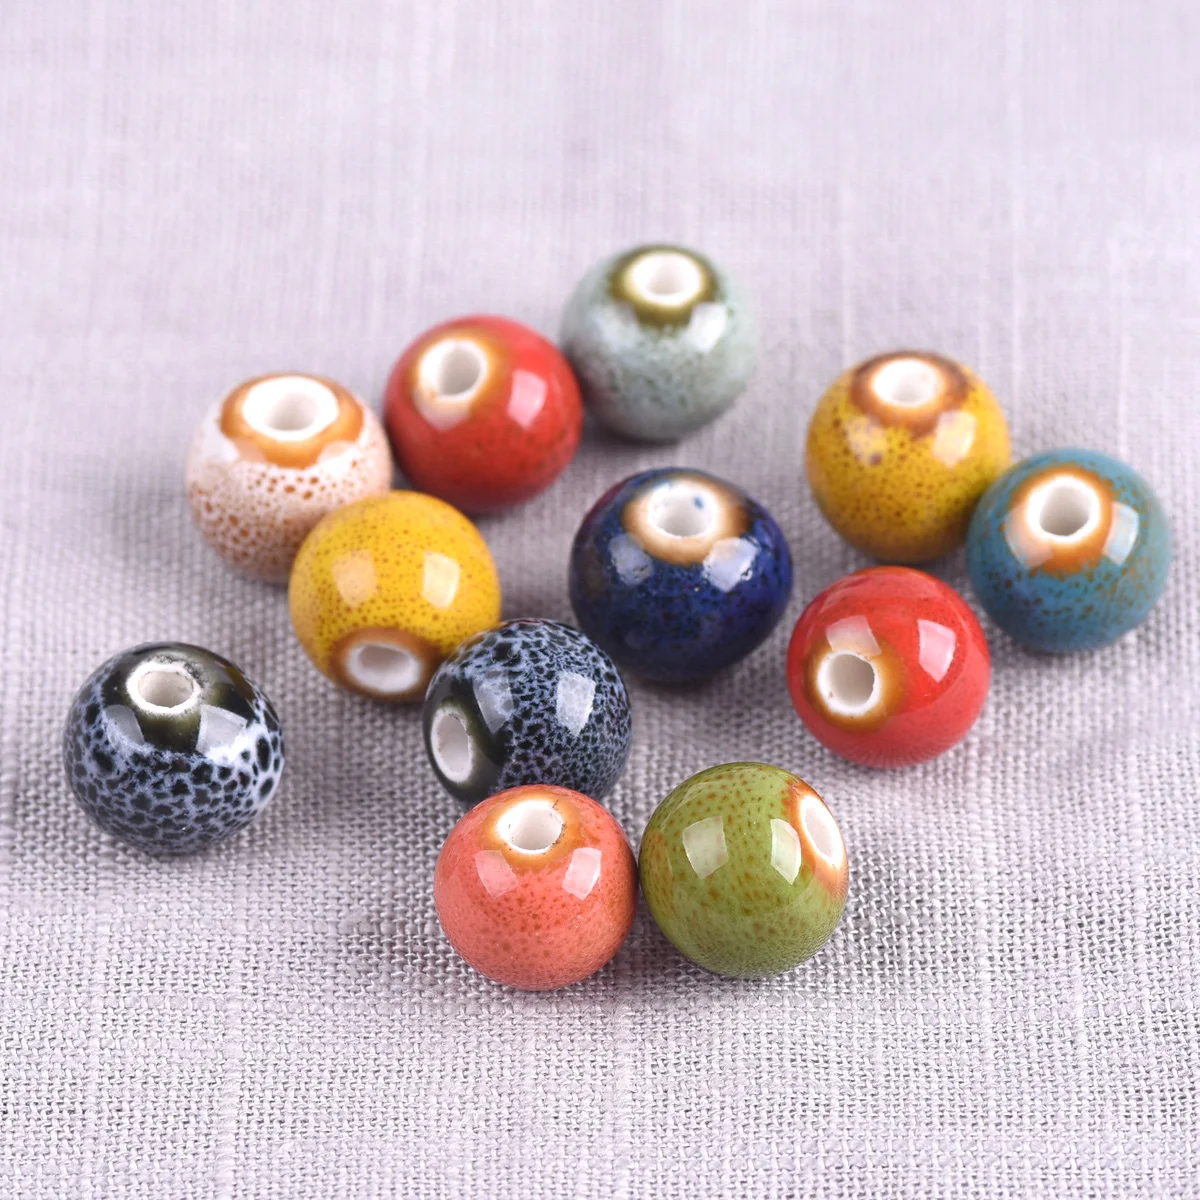 20pcs Round 10mm Fancy Glaze Ceramic Porcelain Loose Spacer Beads Lot For Jewelry Making DIY